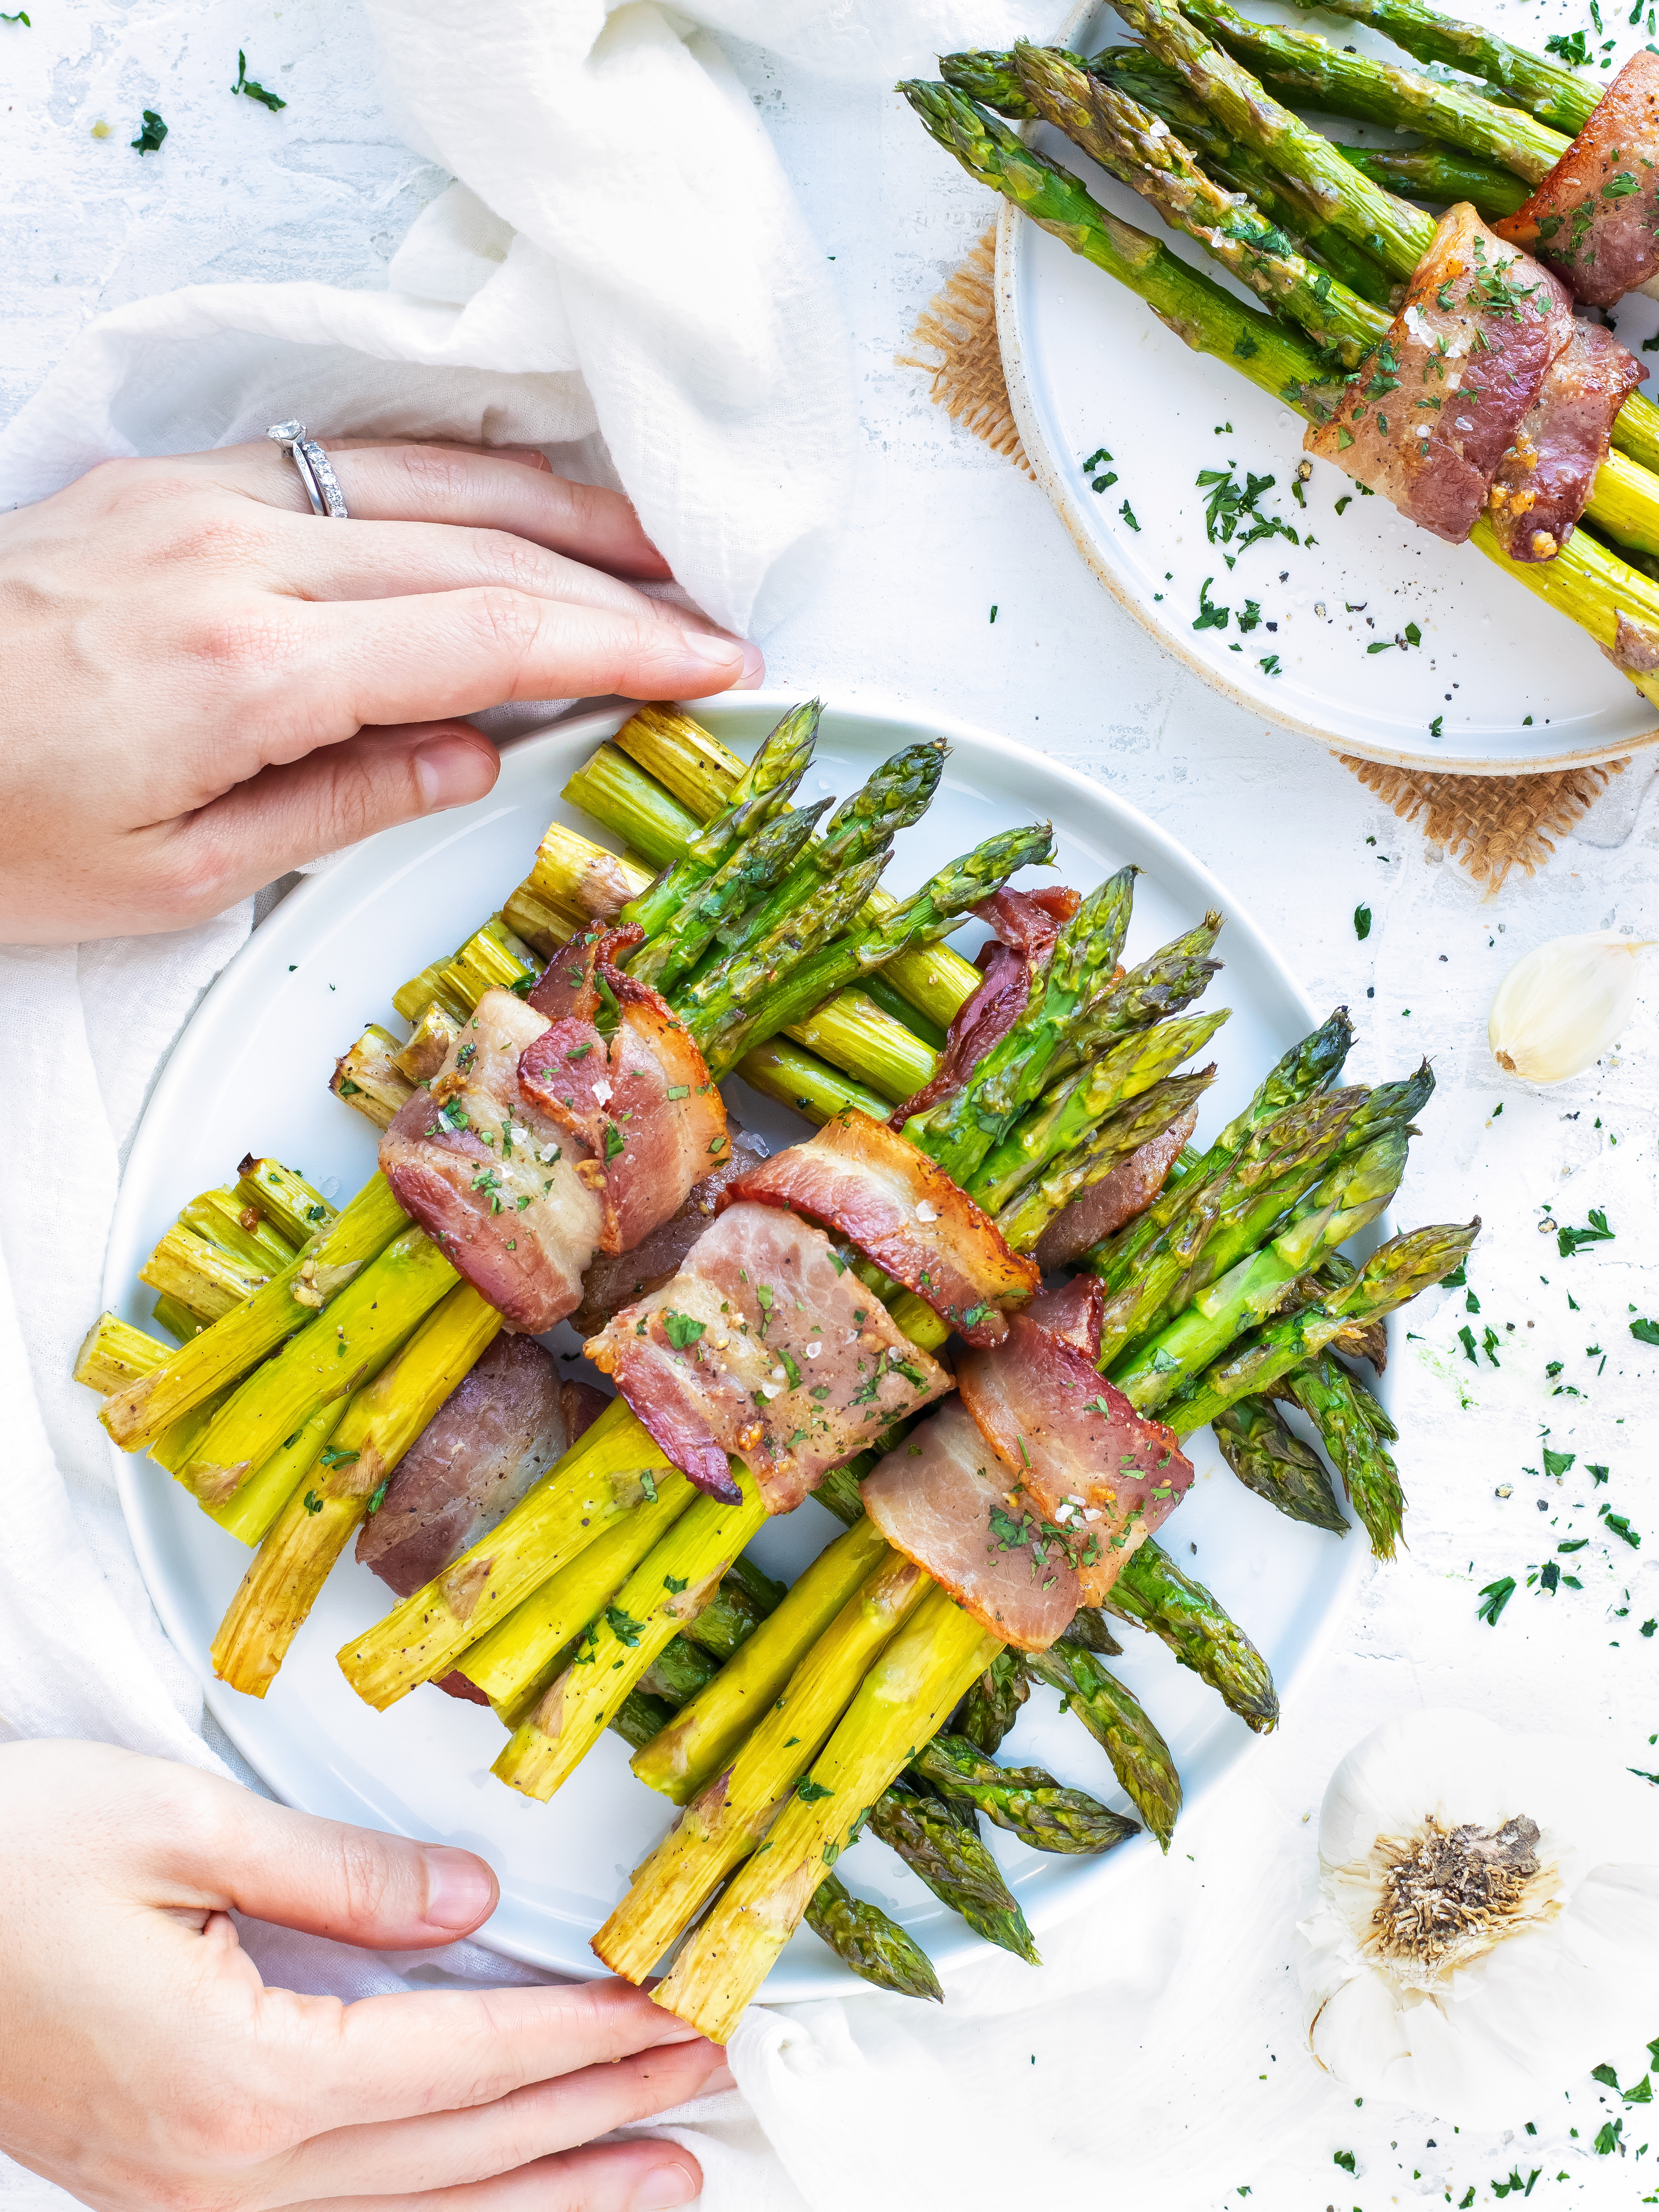 A plate full of bacon wrapped asparagus bundles.